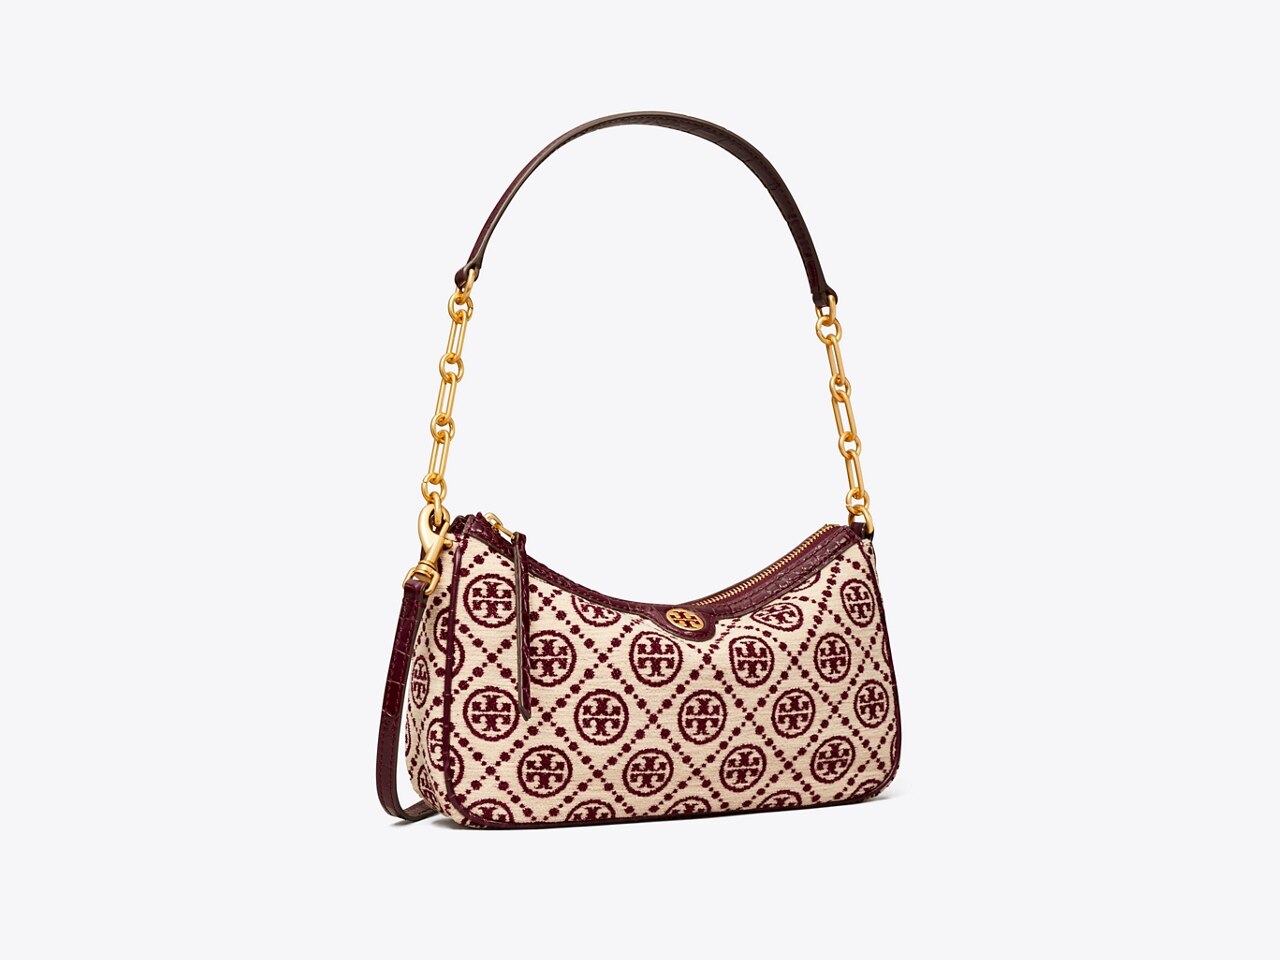 Tory Burch T Monogram Tote Unboxing 2021 